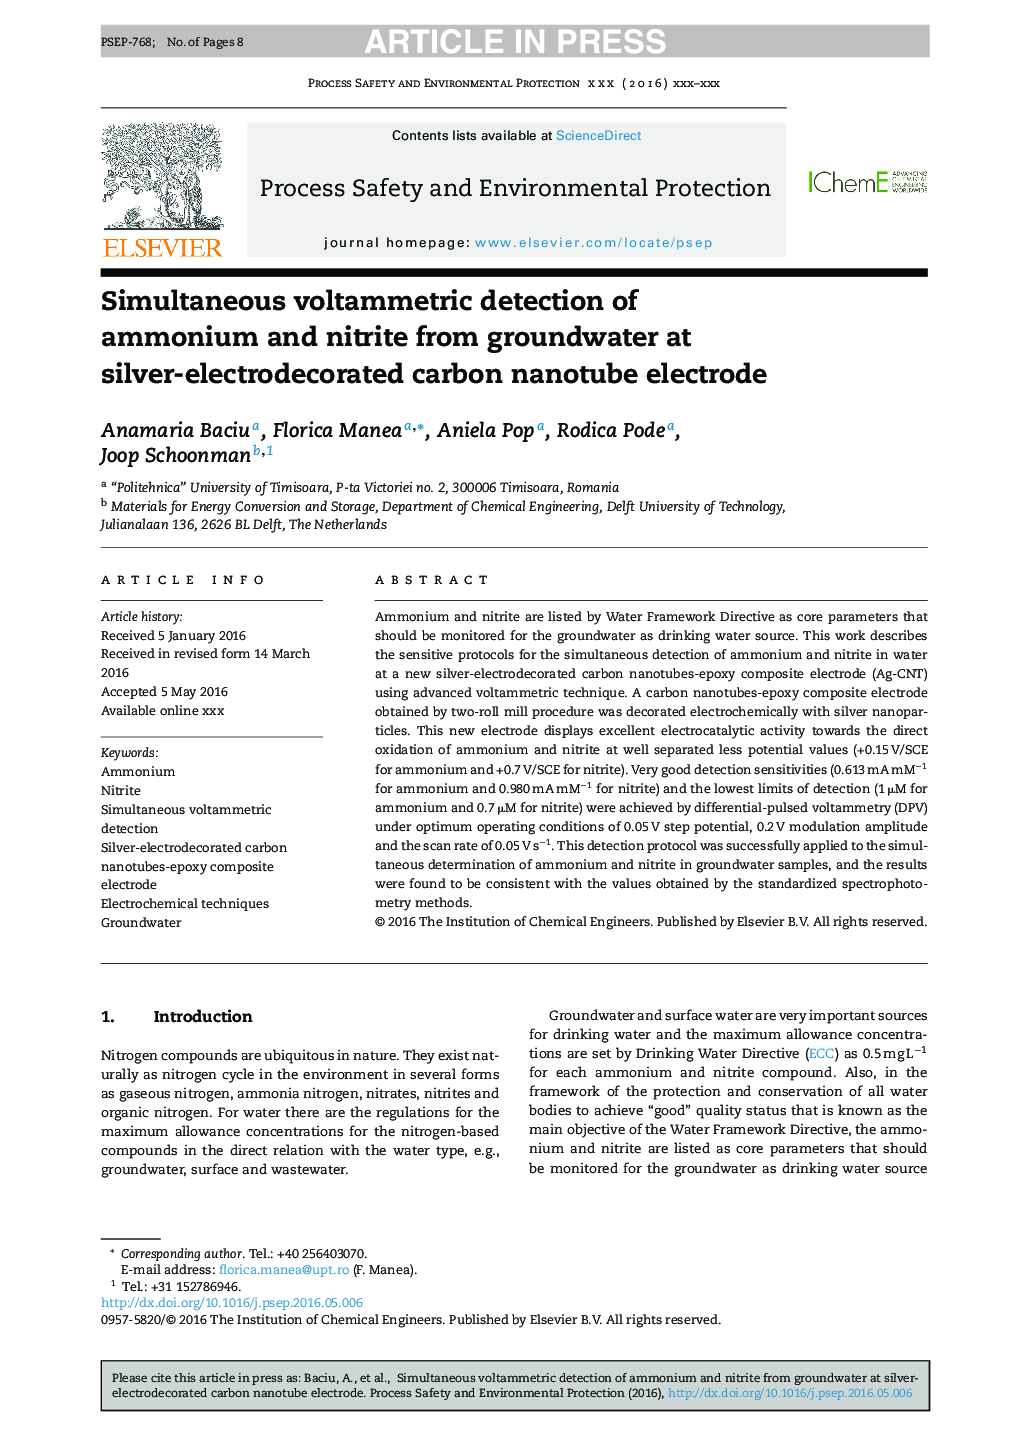 Simultaneous voltammetric detection of ammonium and nitrite from groundwater at silver-electrodecorated carbon nanotube electrode